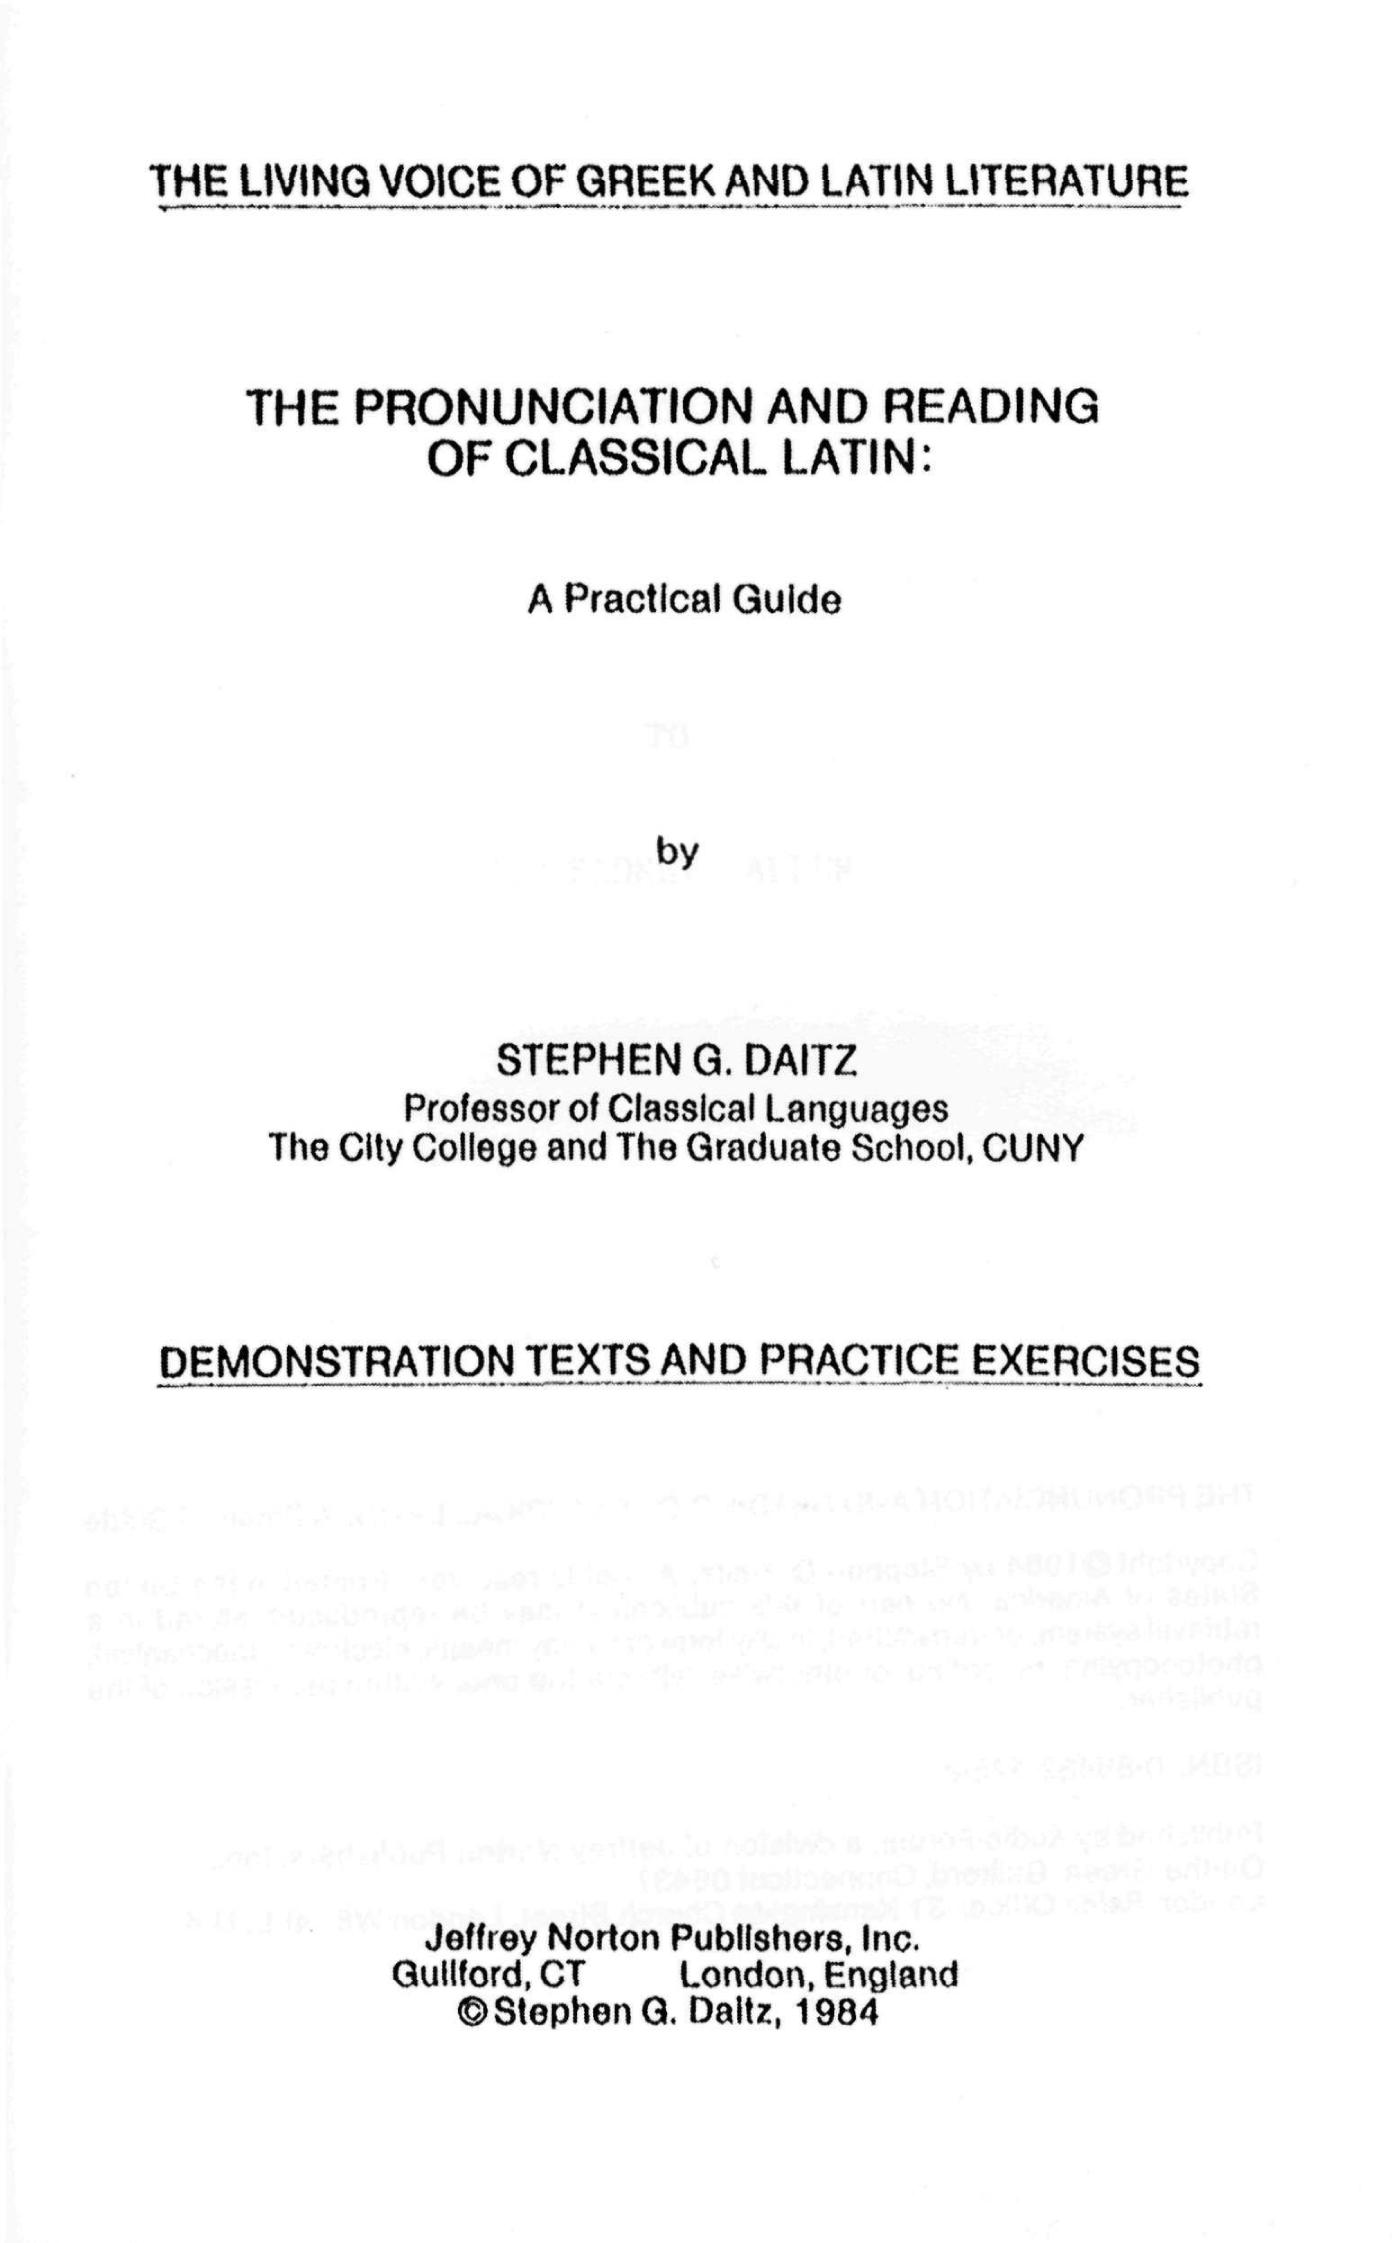 Pronunciation and Reading of Classical Latin